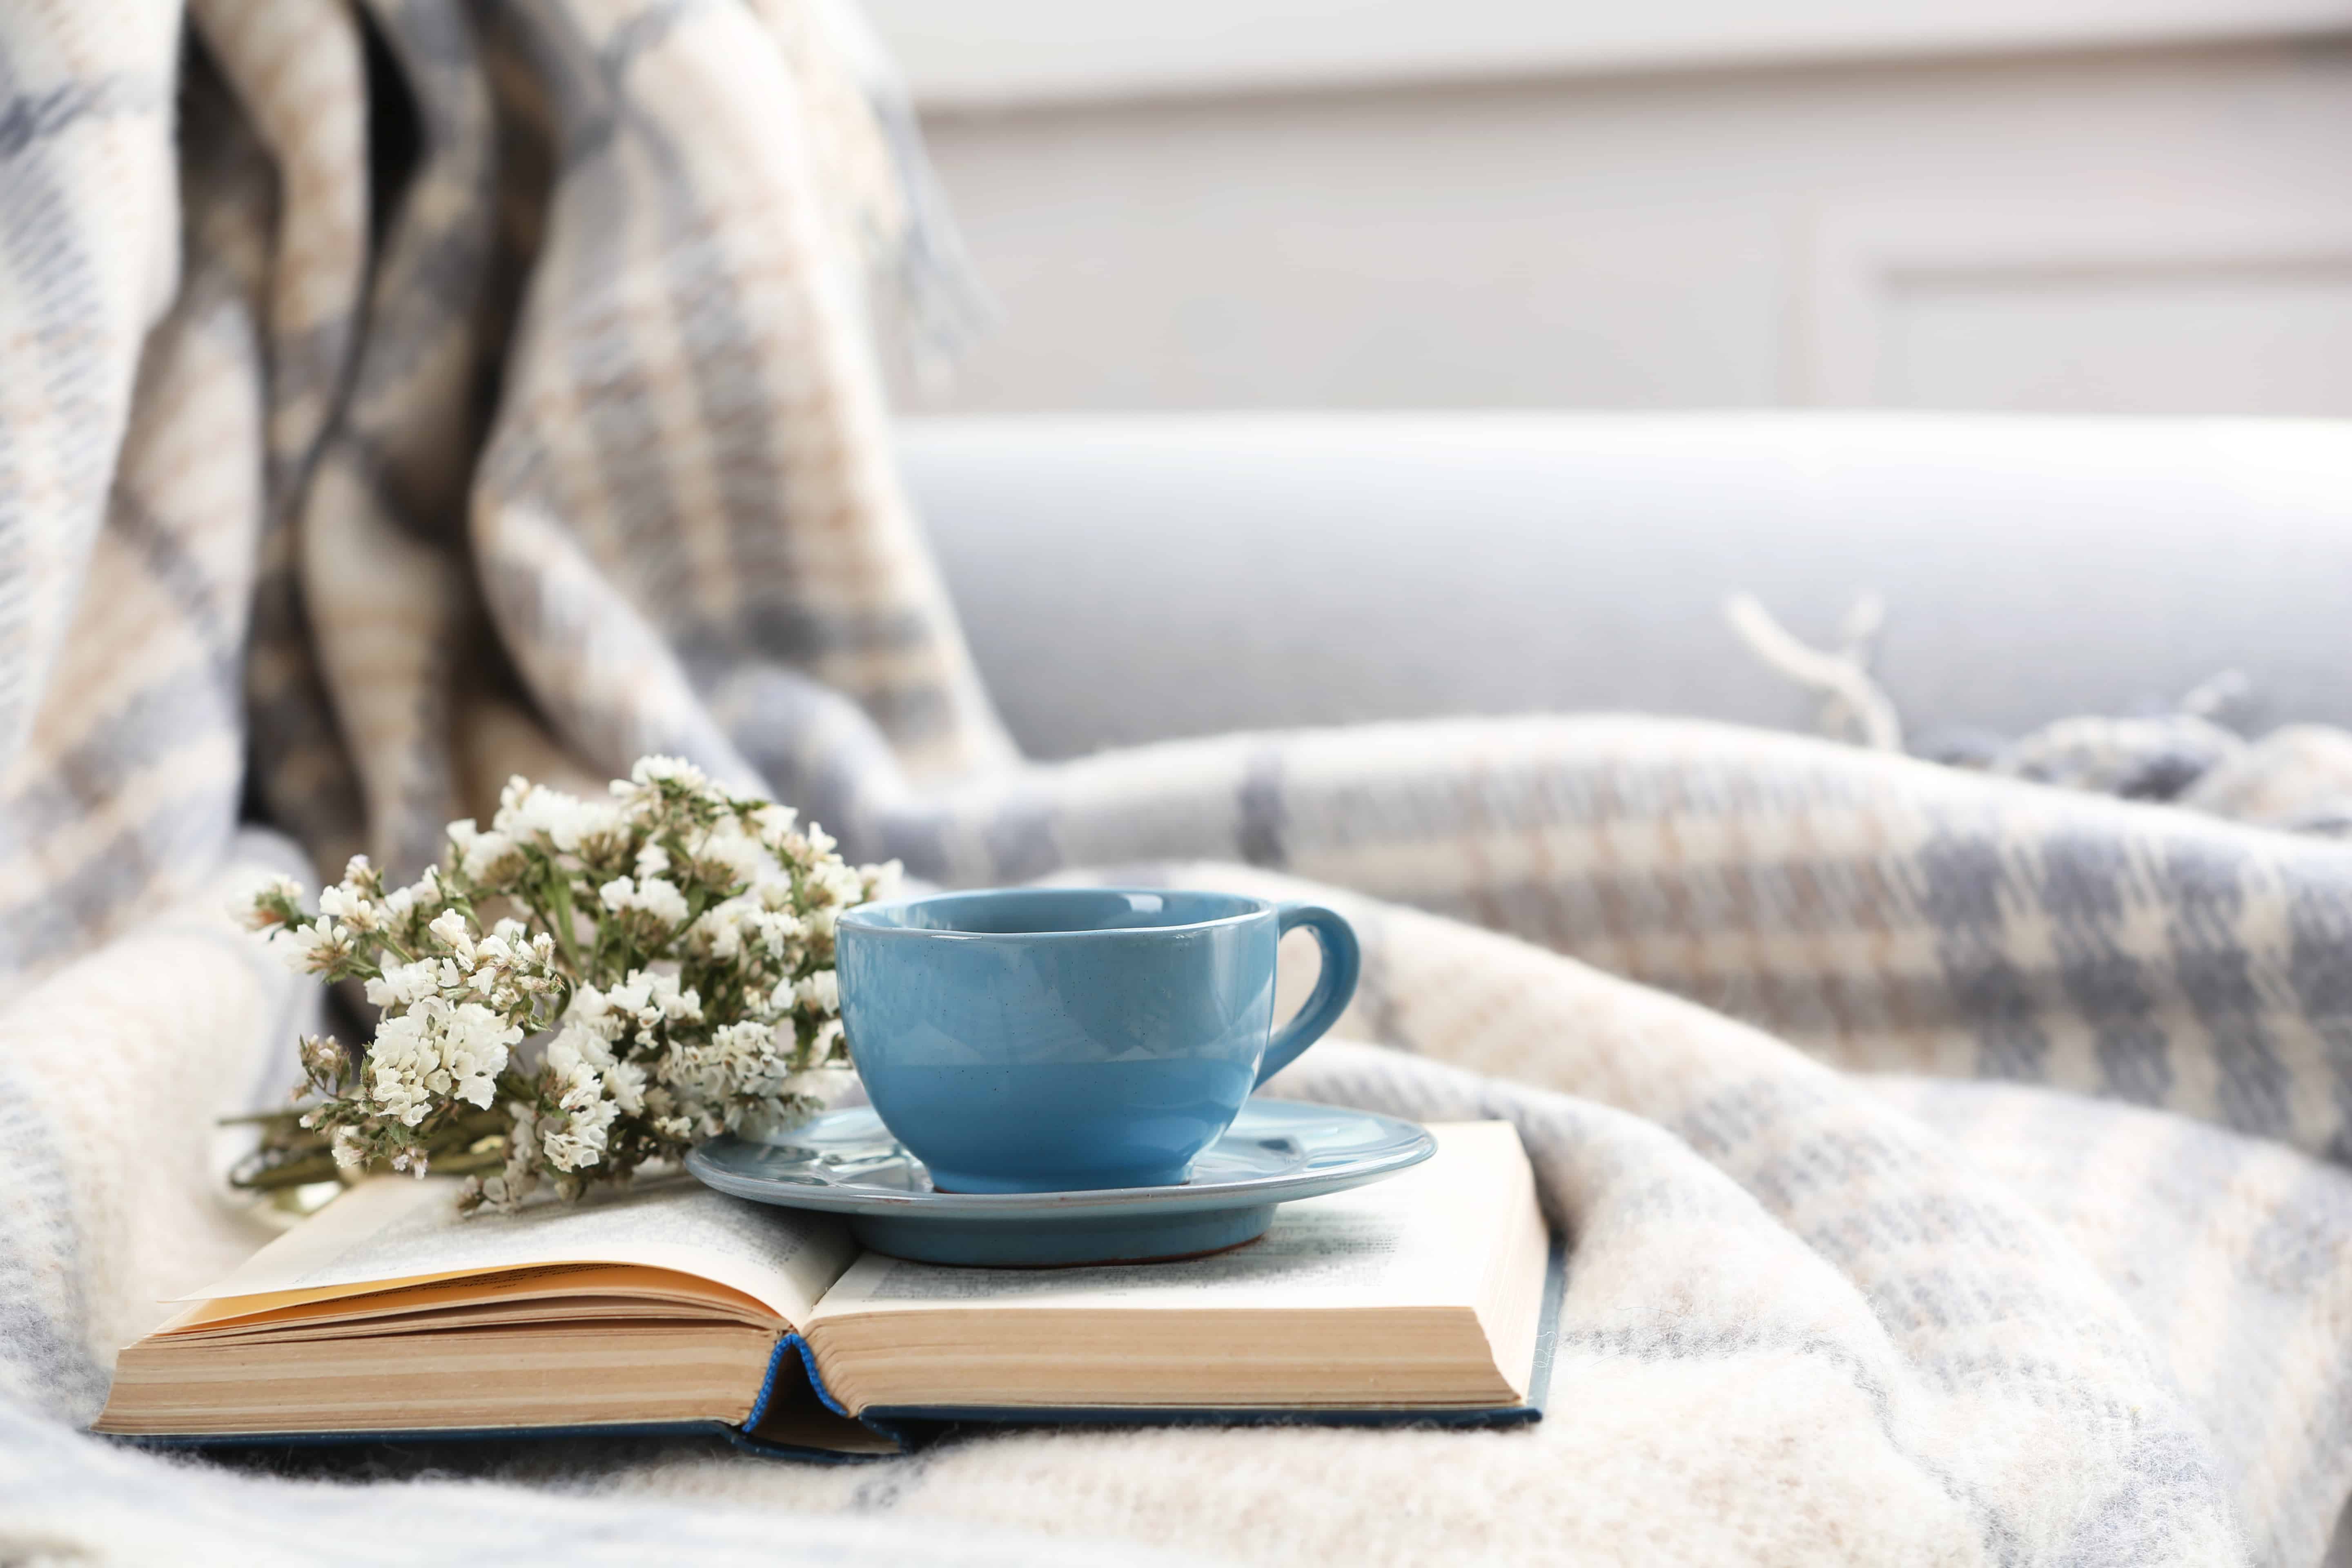 Blue cup of coffee with open book on sofa in room